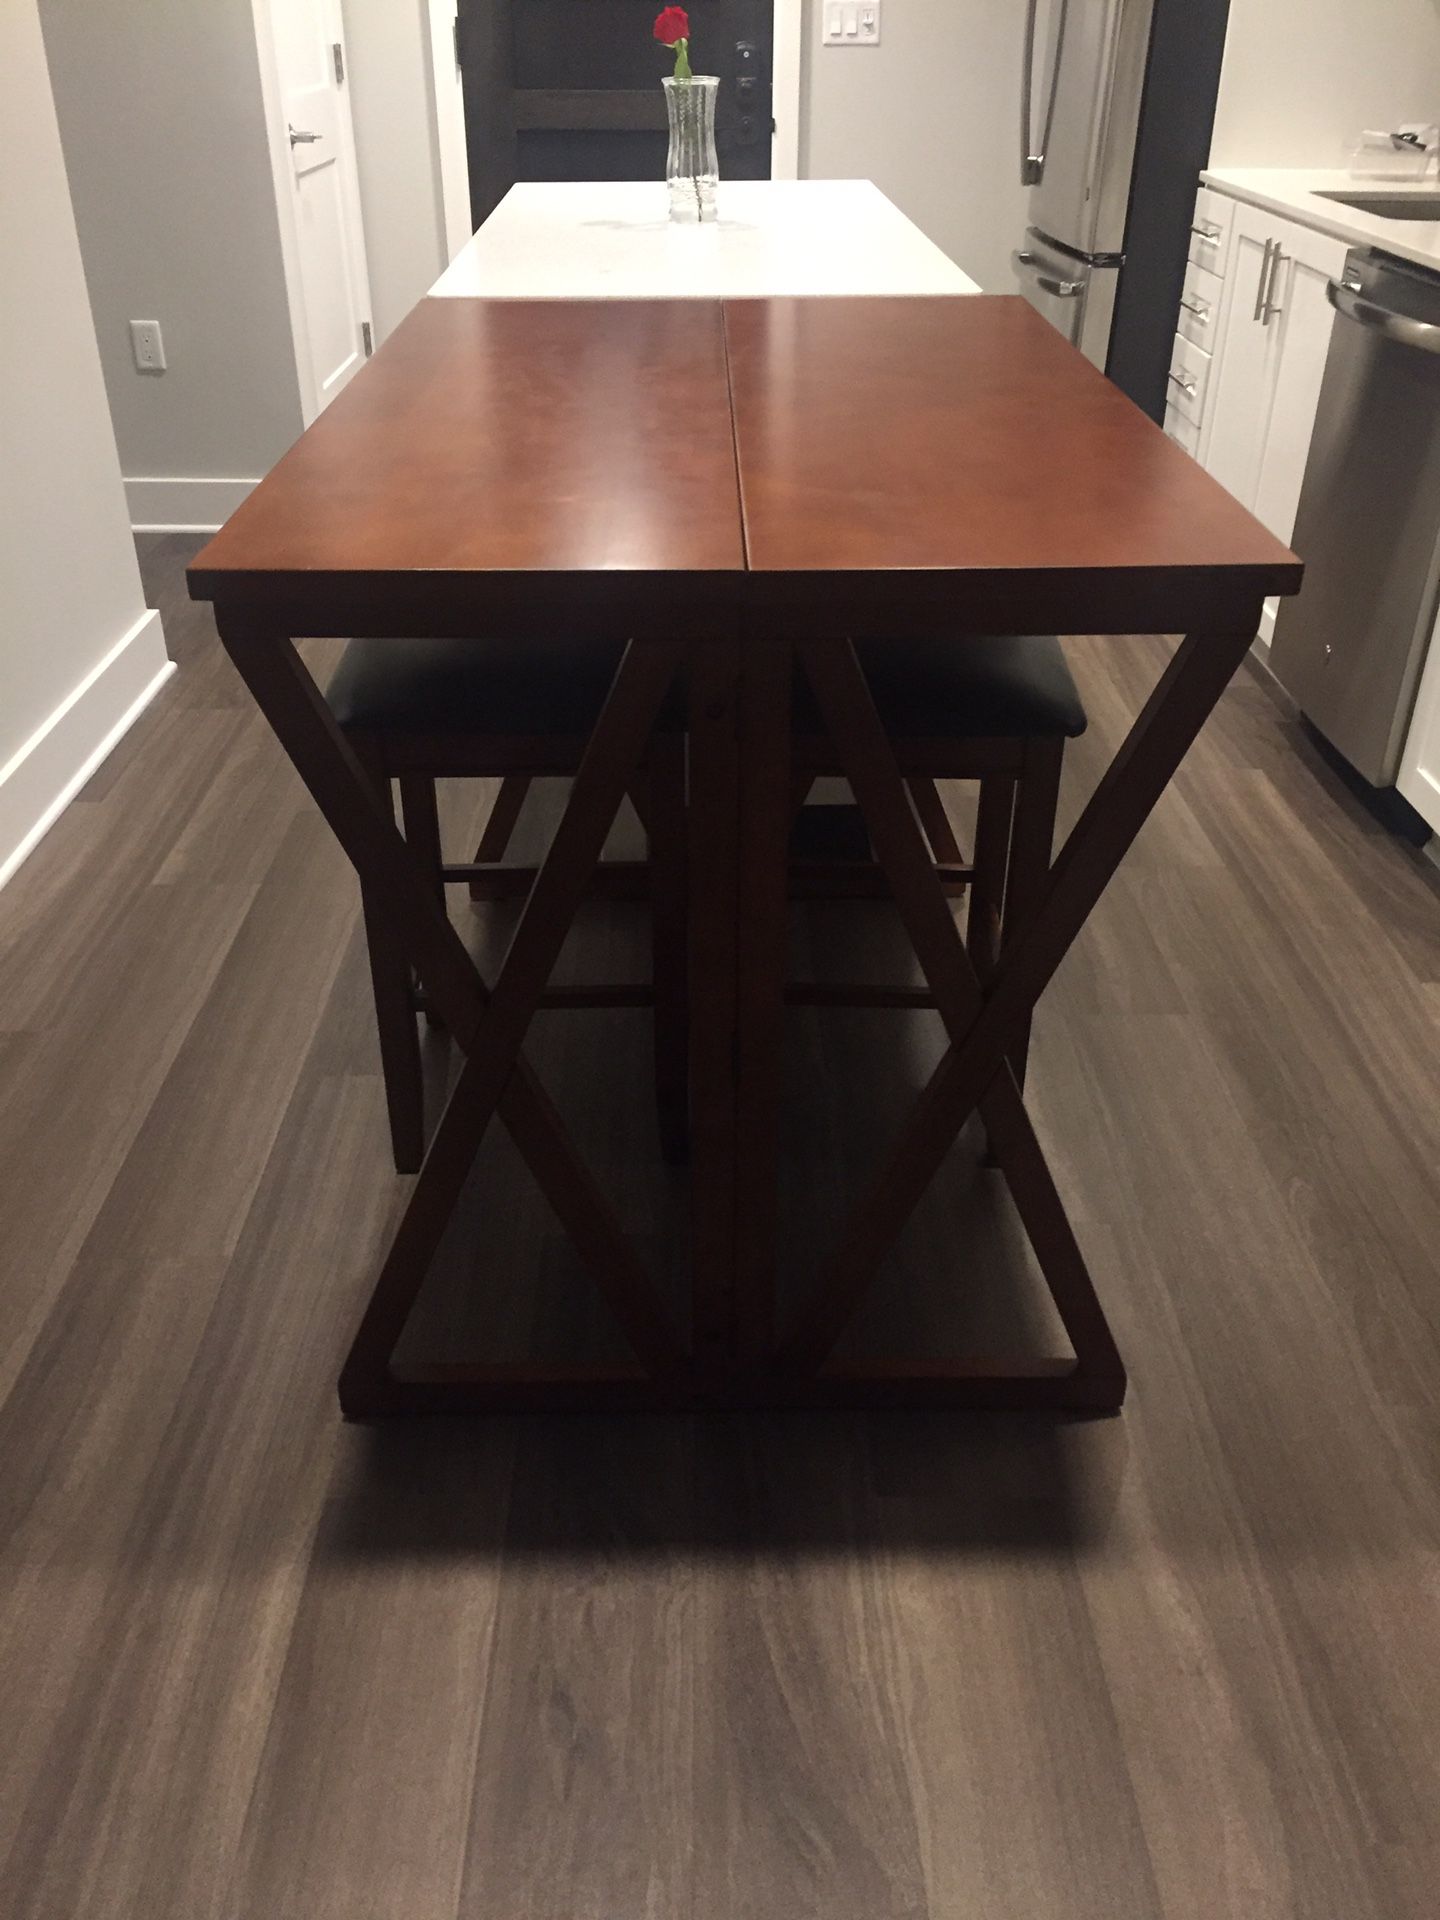 Haverty’s buffet with matching barstools